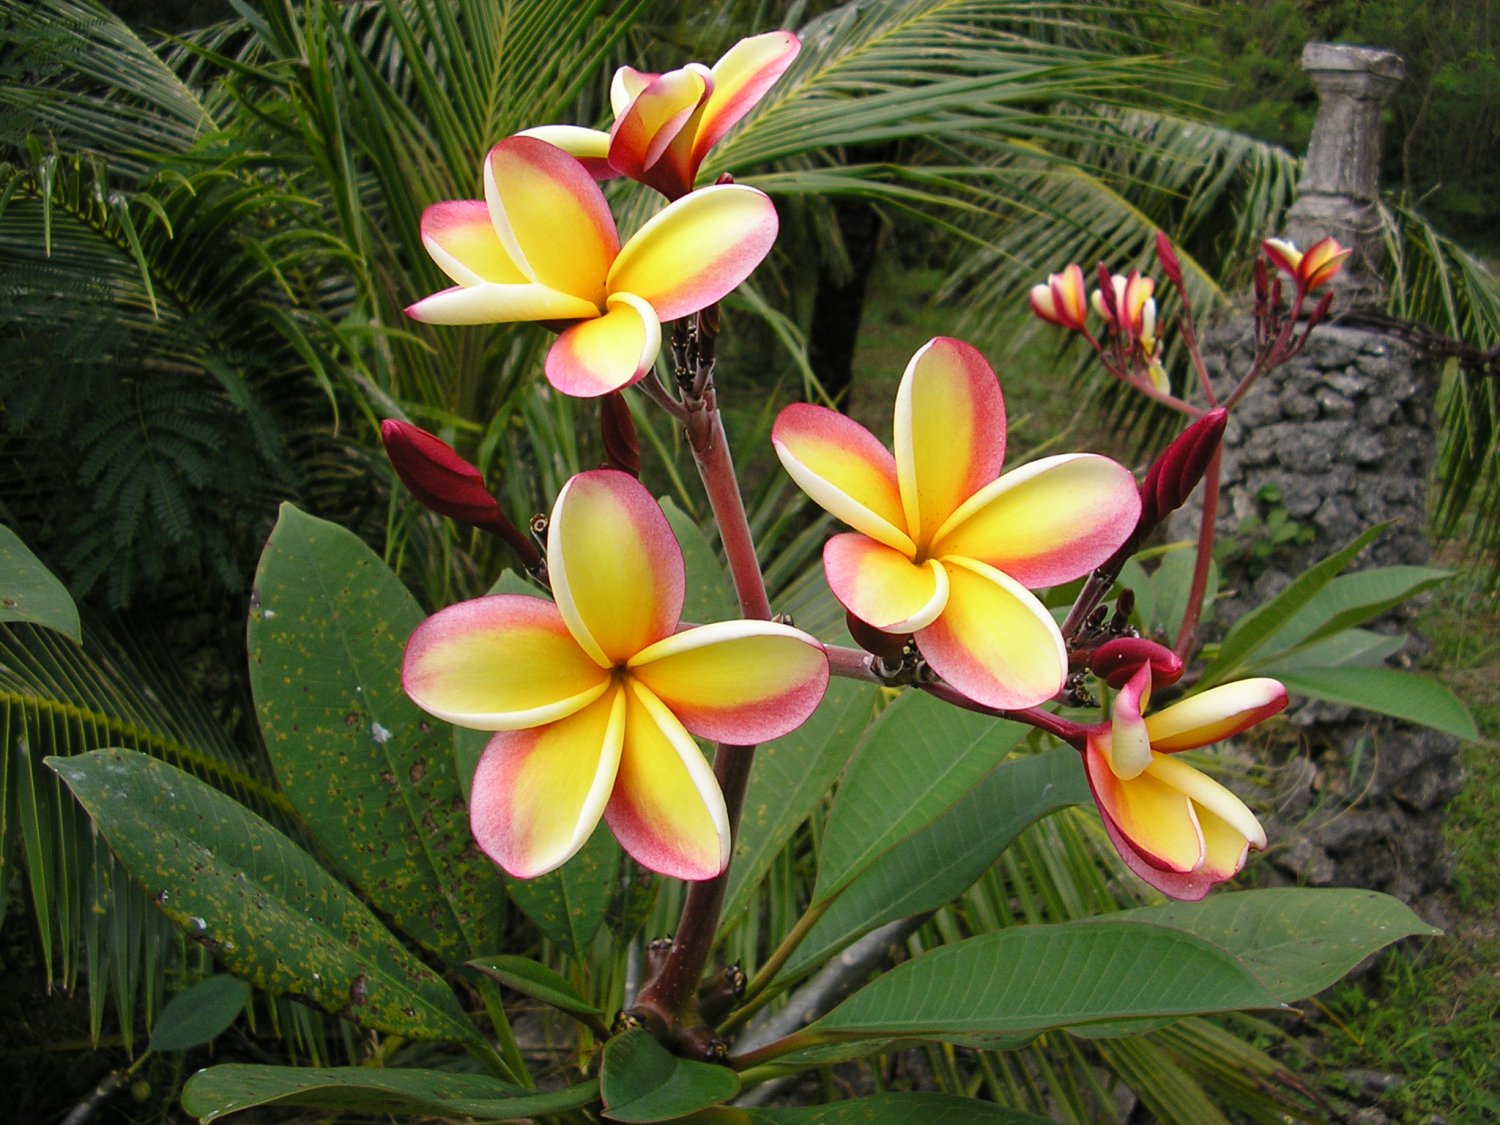 We offer one entire Rainbow Plumeria seed pod freshly hatched. 